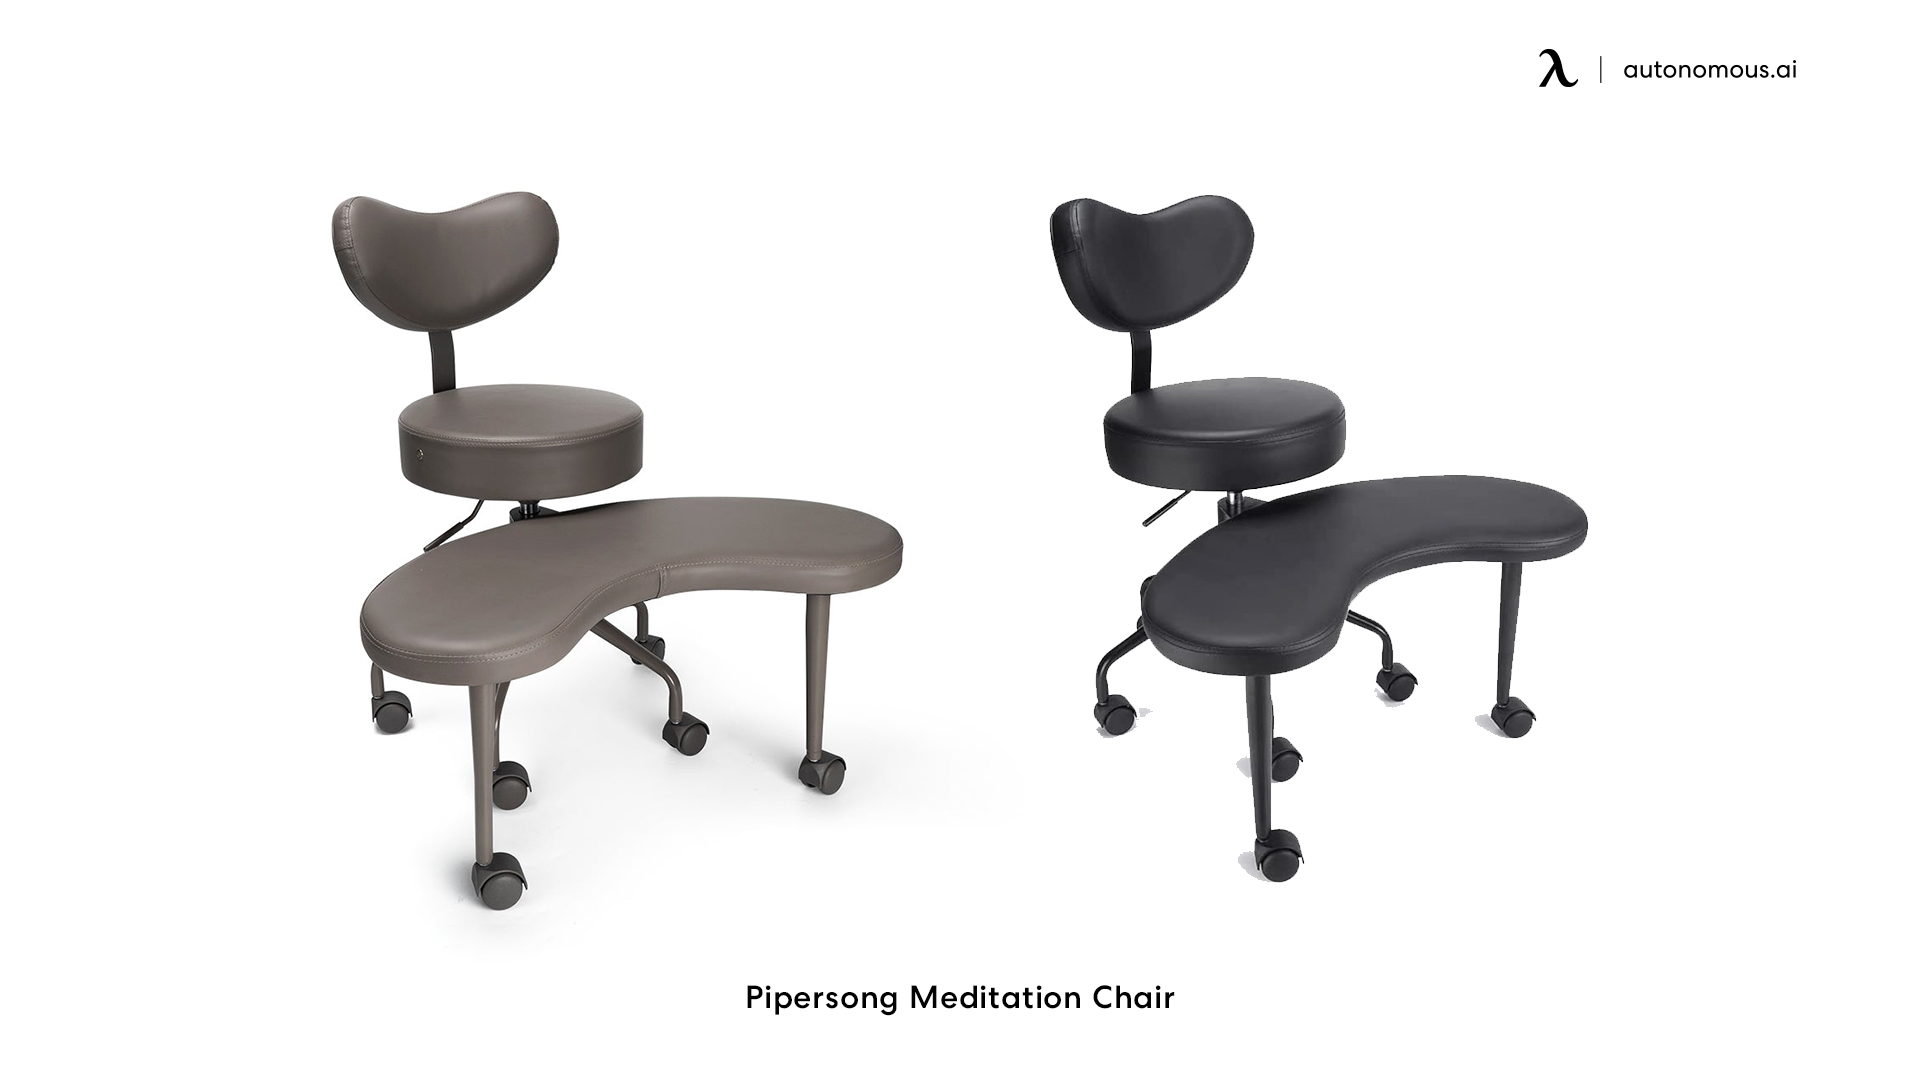 Pipersong Cross-Legged Office Chair